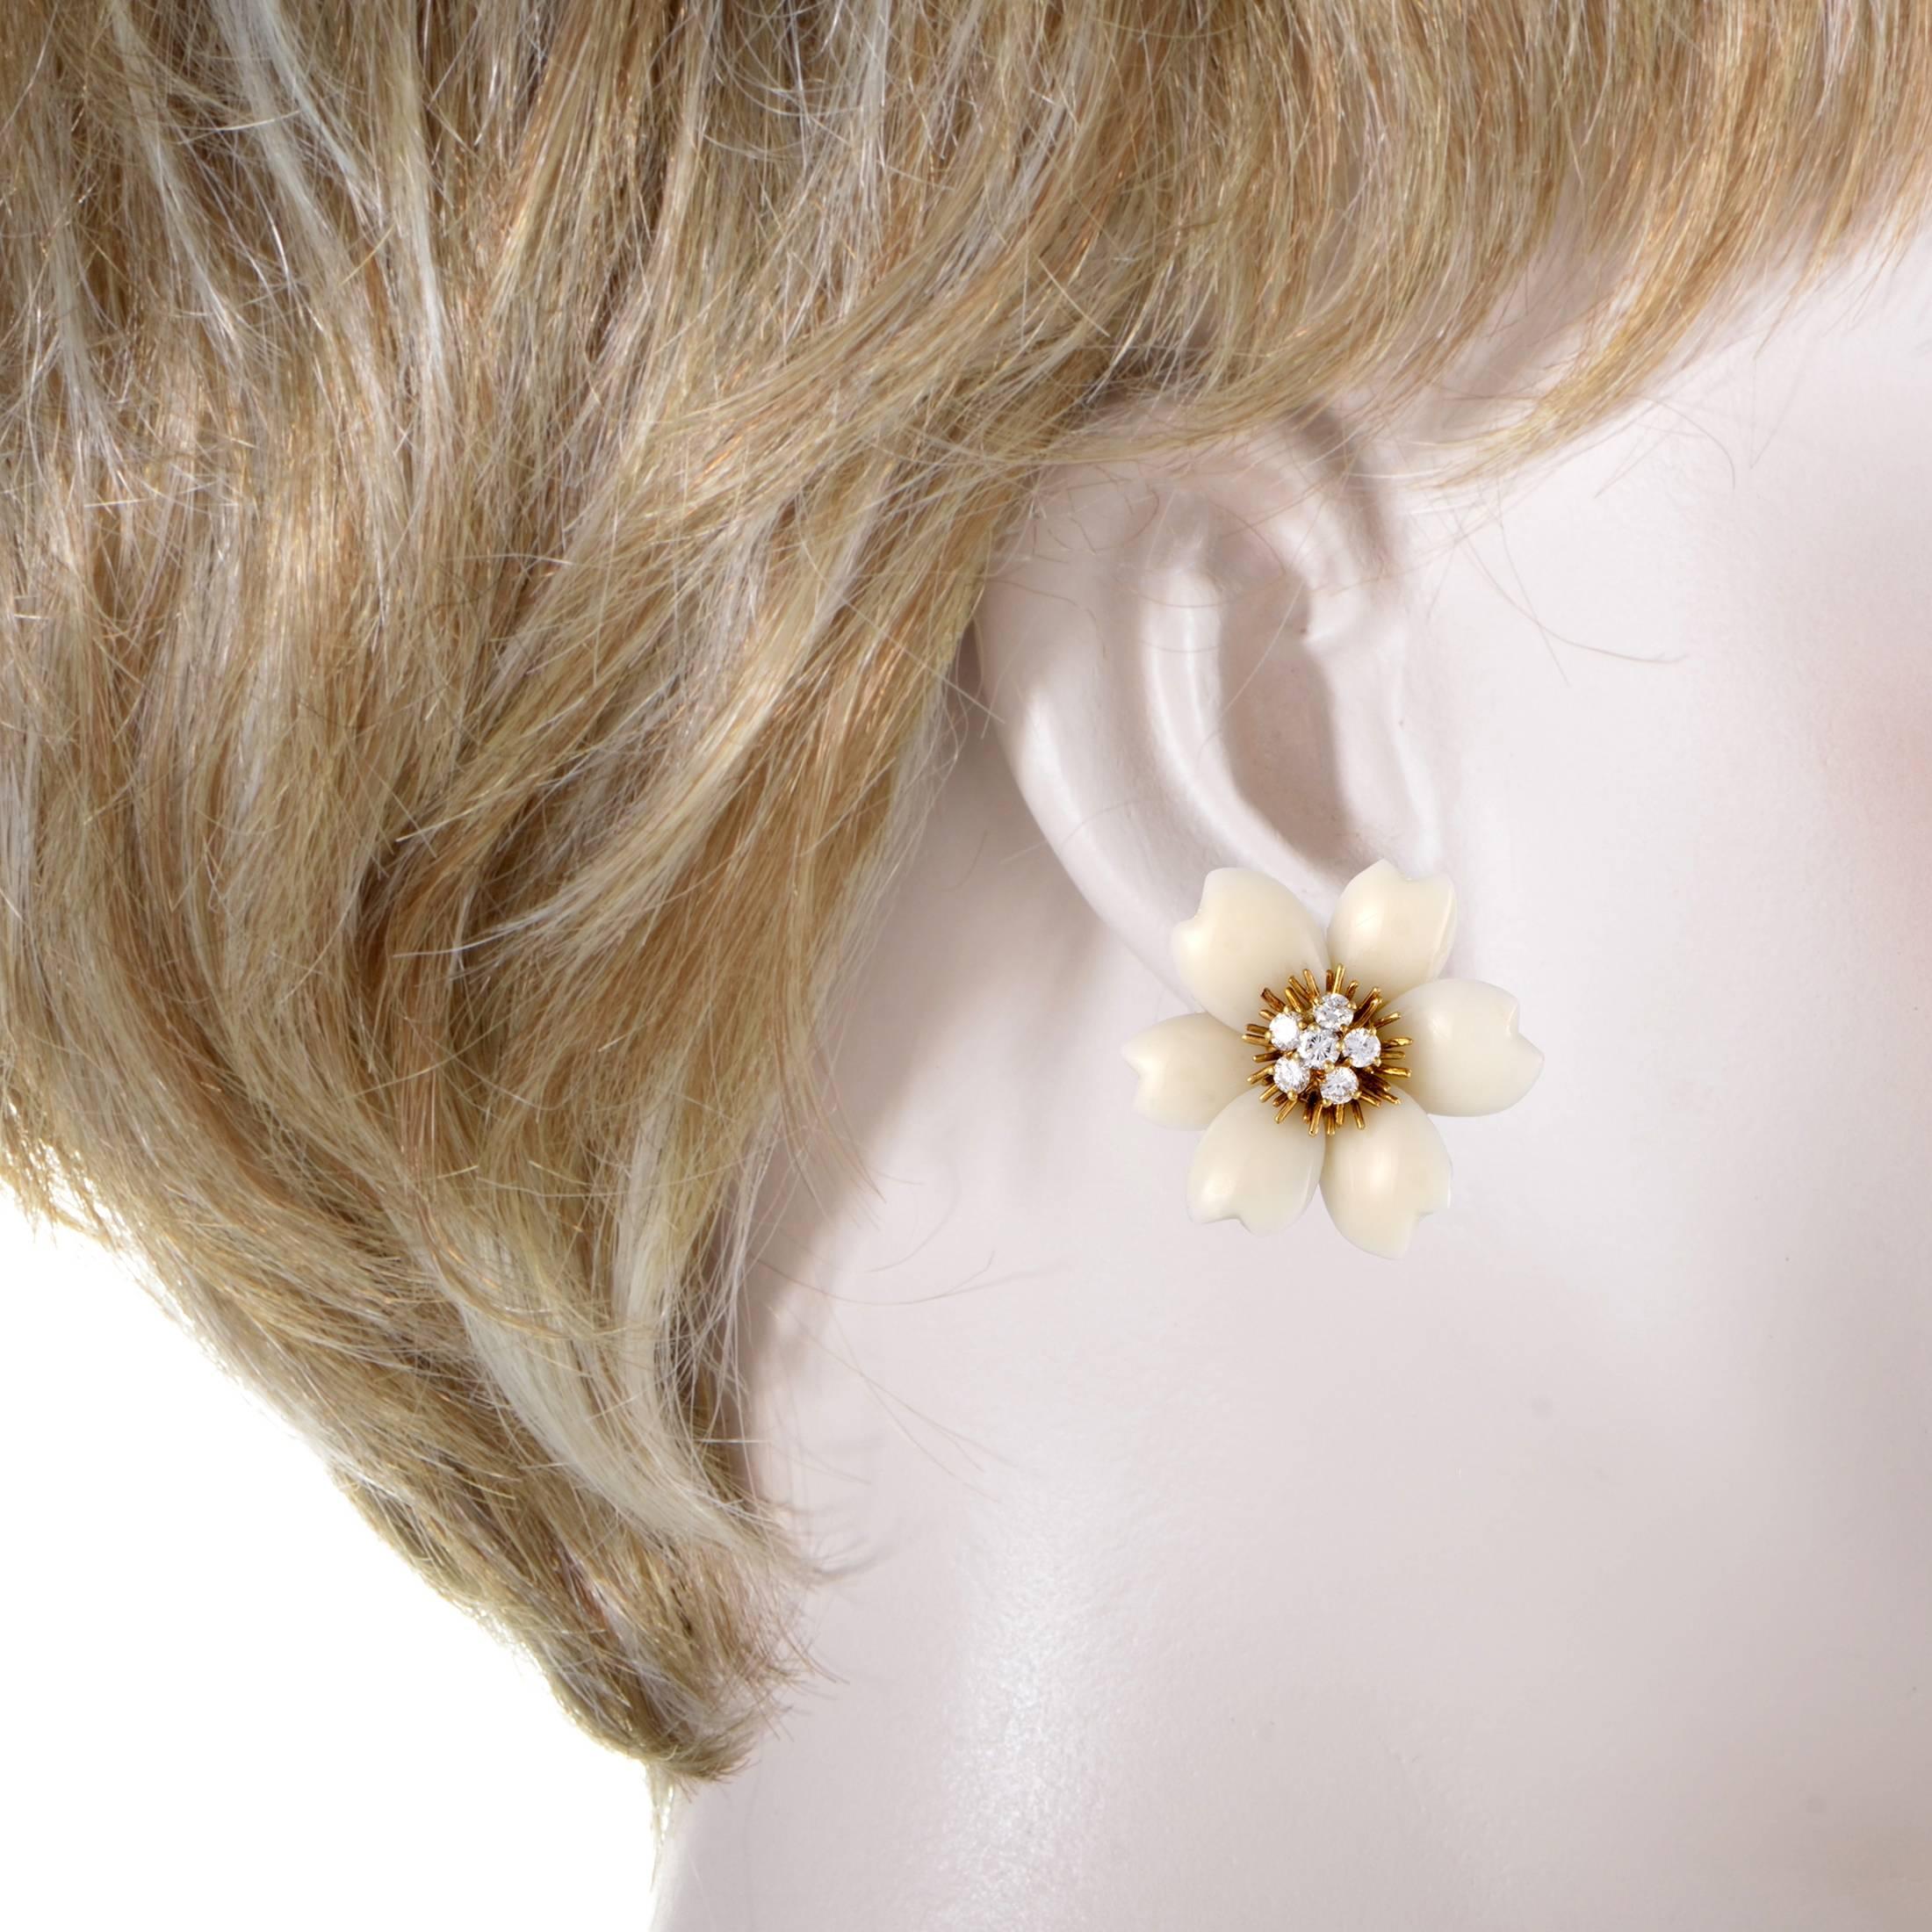 These stunning clip-on earrings by Van Cleef & Arpels emanate beauty and style. Made in shimmering 18K yellow gold, the attractive floral earrings have sparkling diamonds in the center and elegant white coral petals that accentuate the luxurious